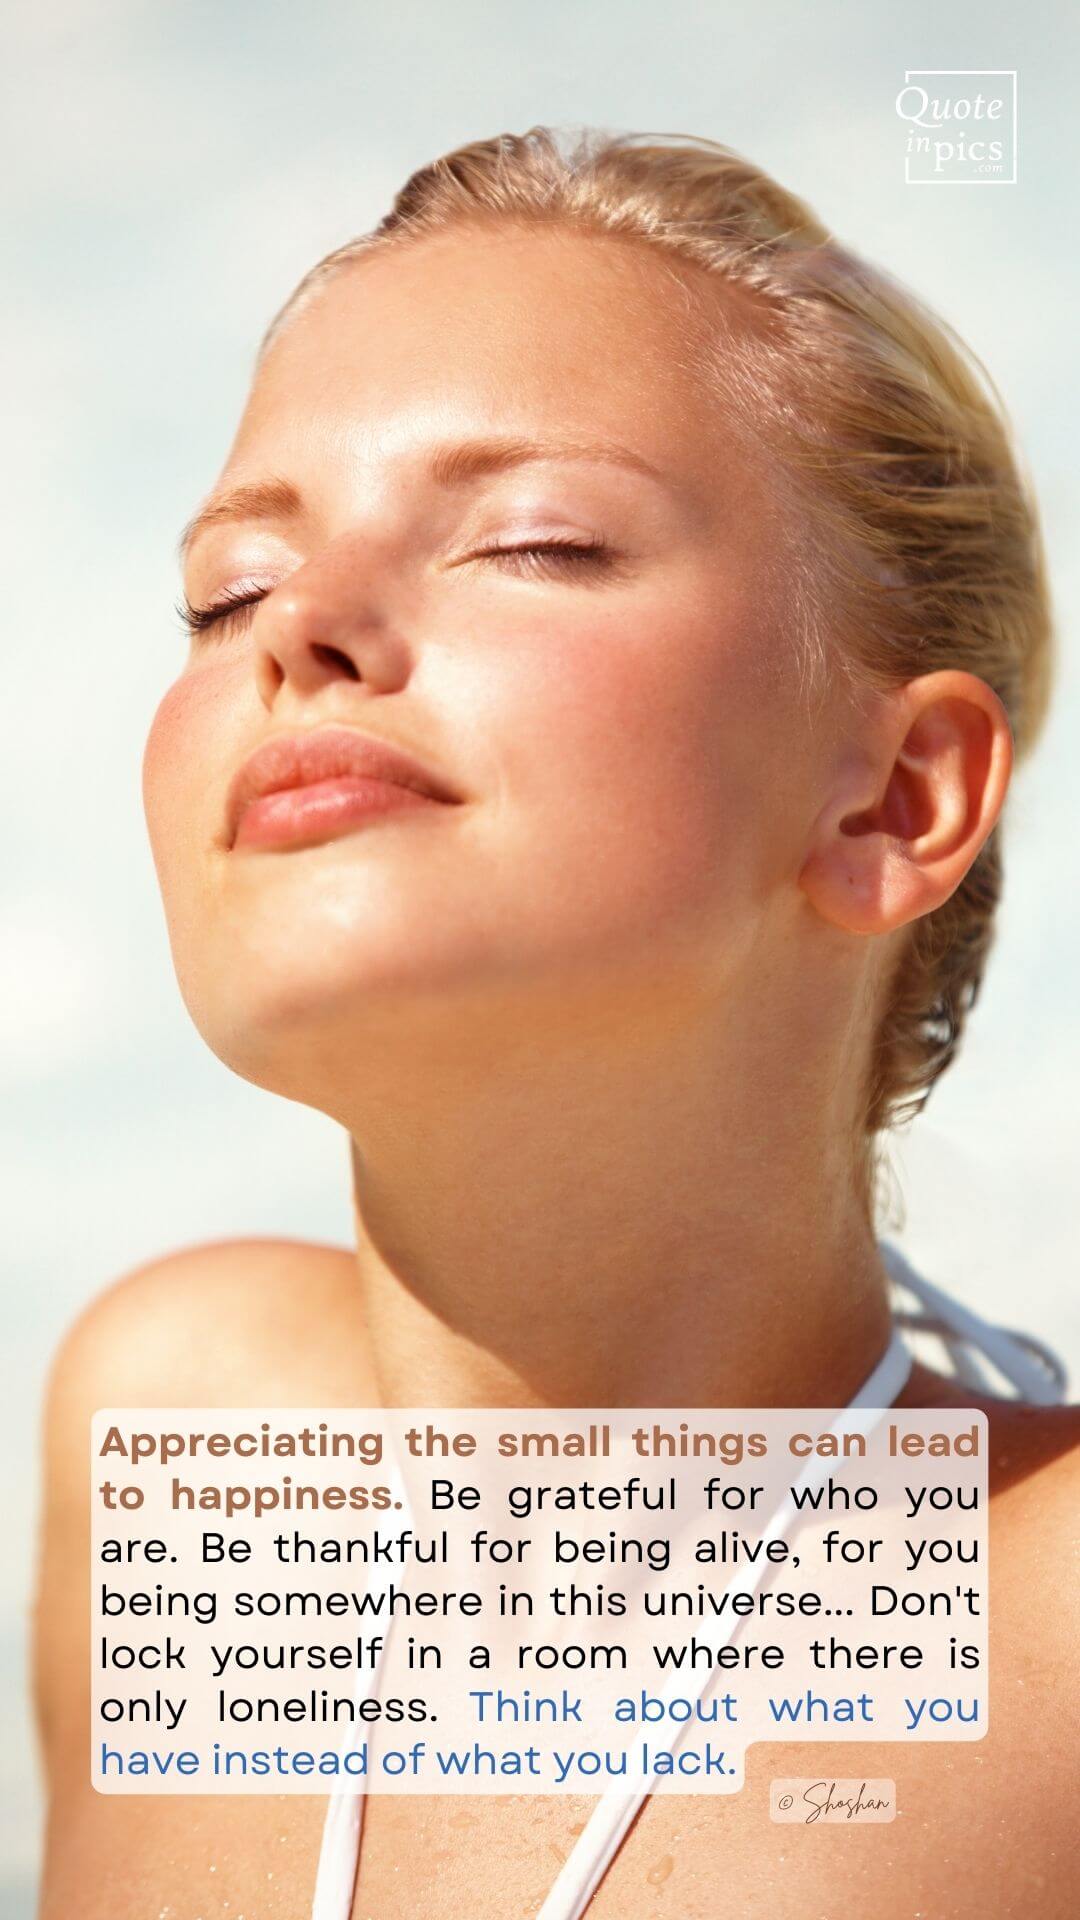 Appreciating the small things can lead to happiness.